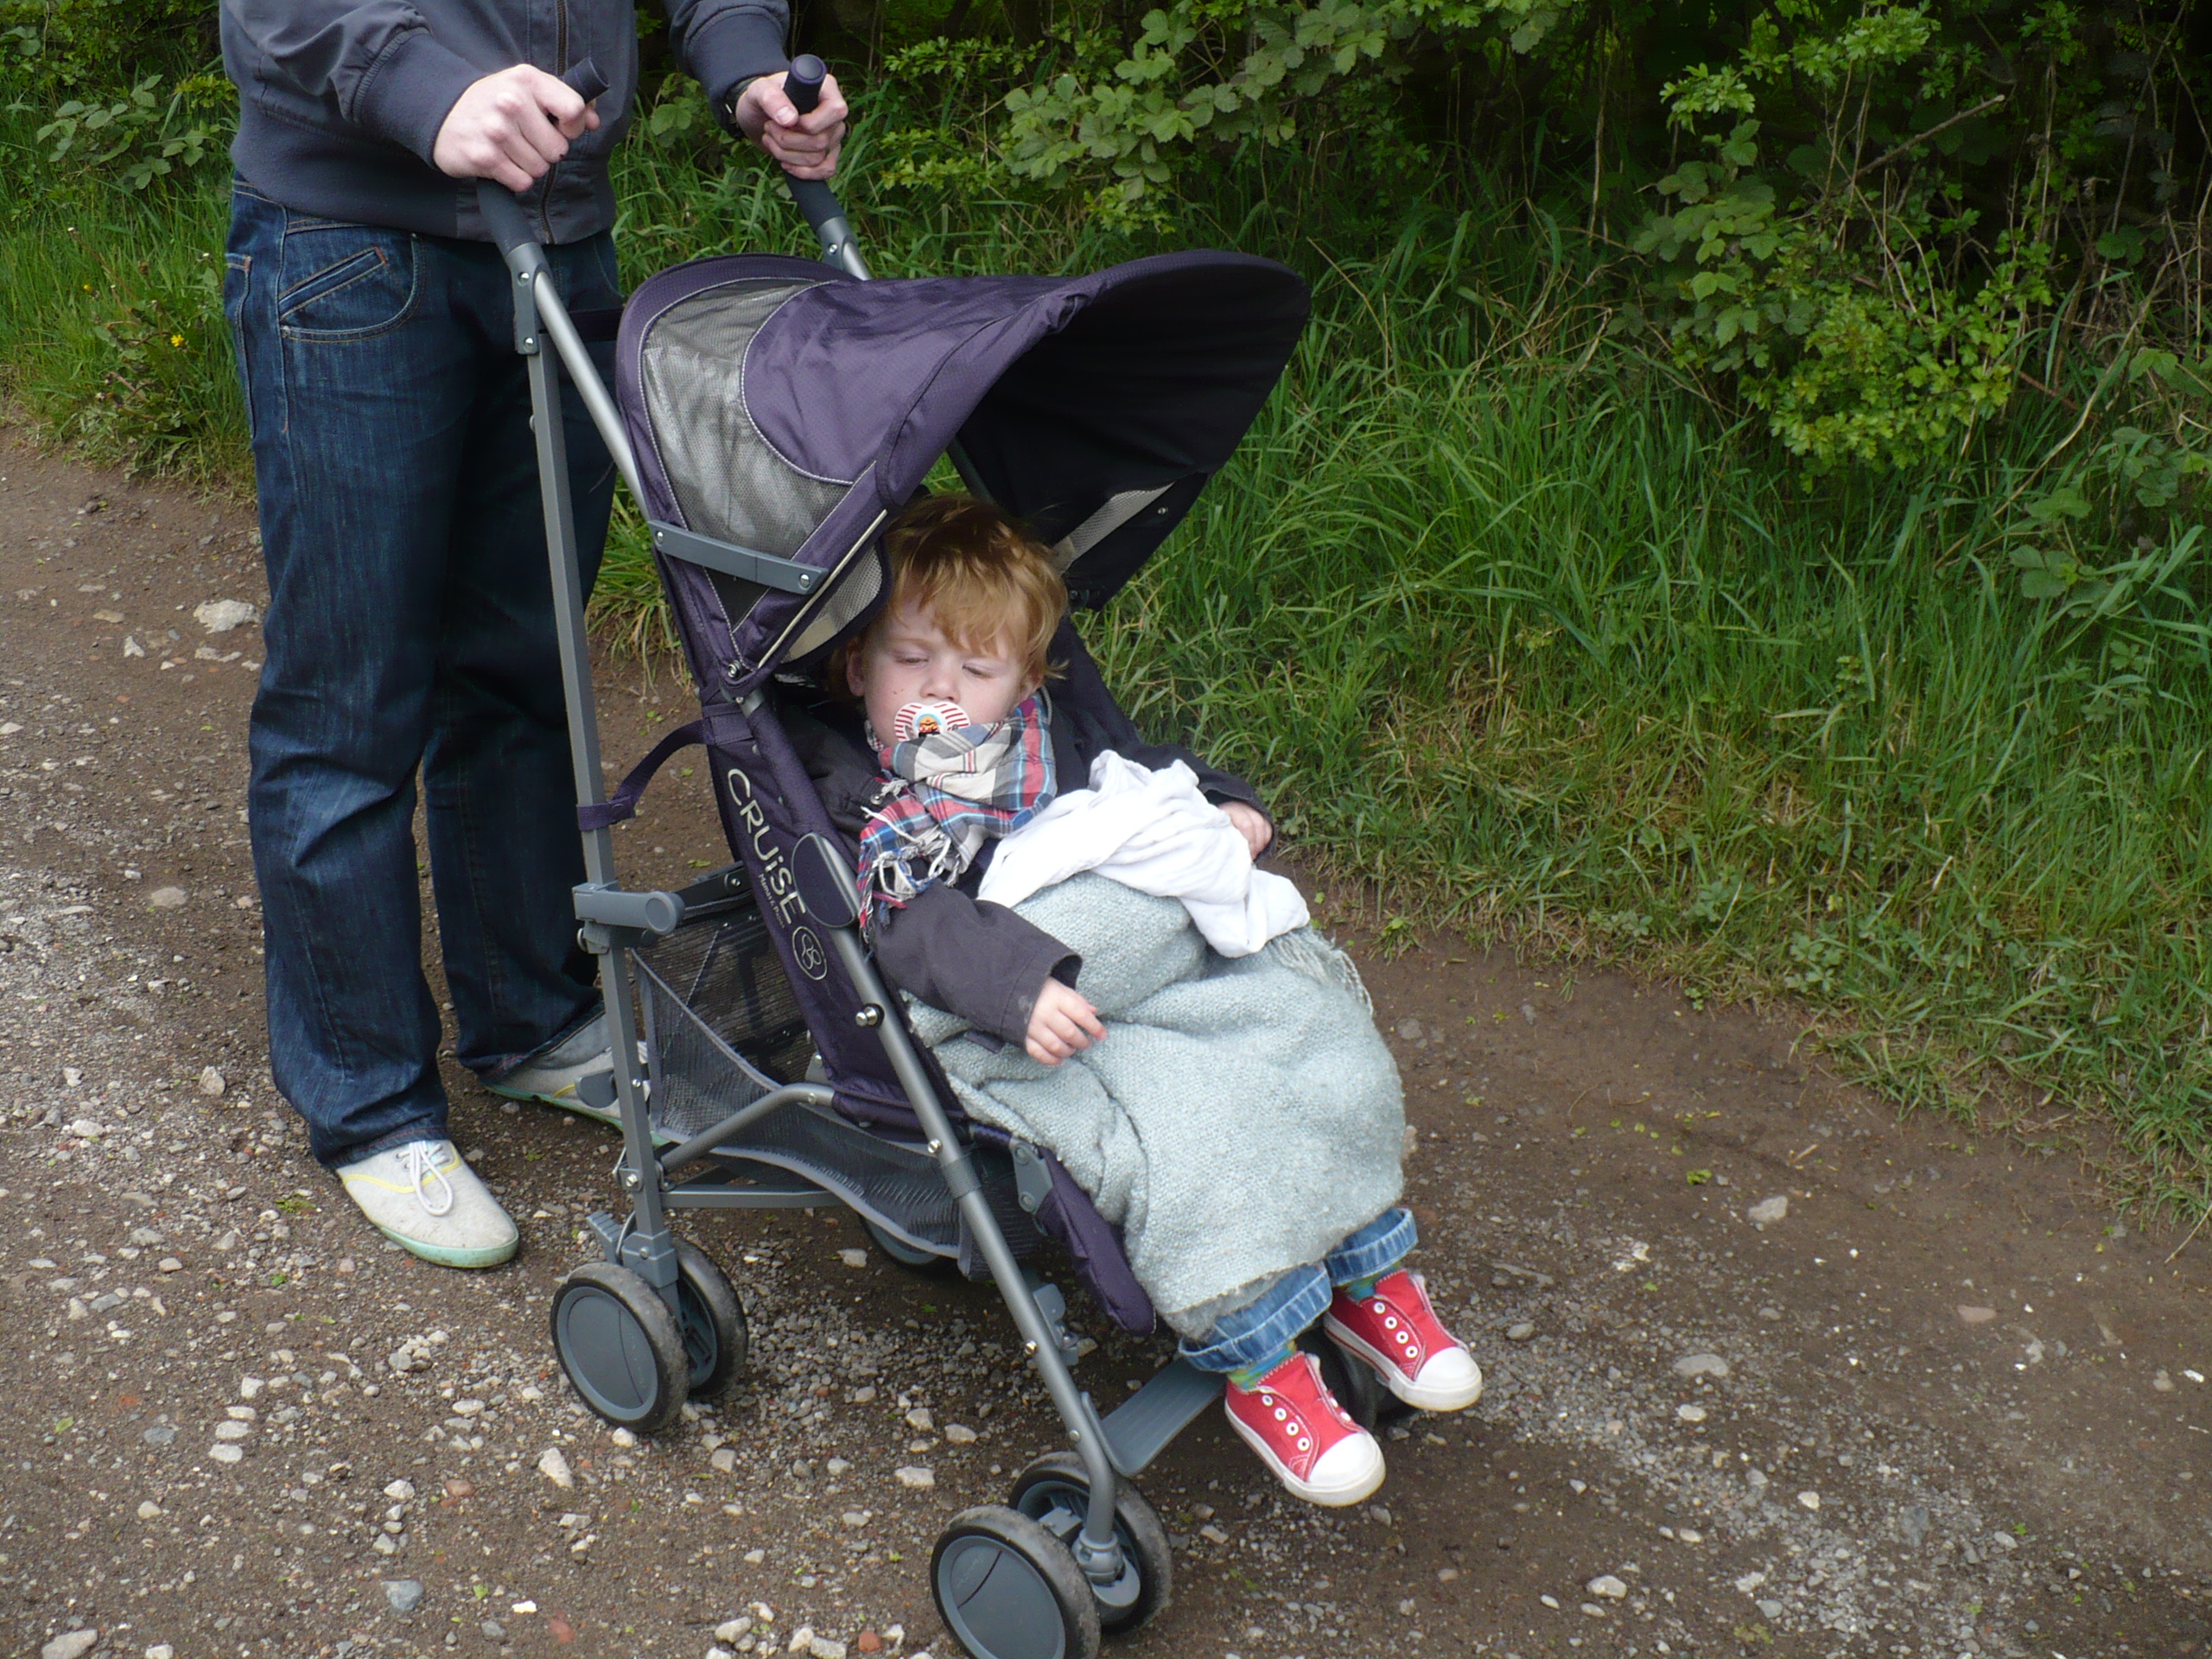 mamas and papas cruise pushchair package